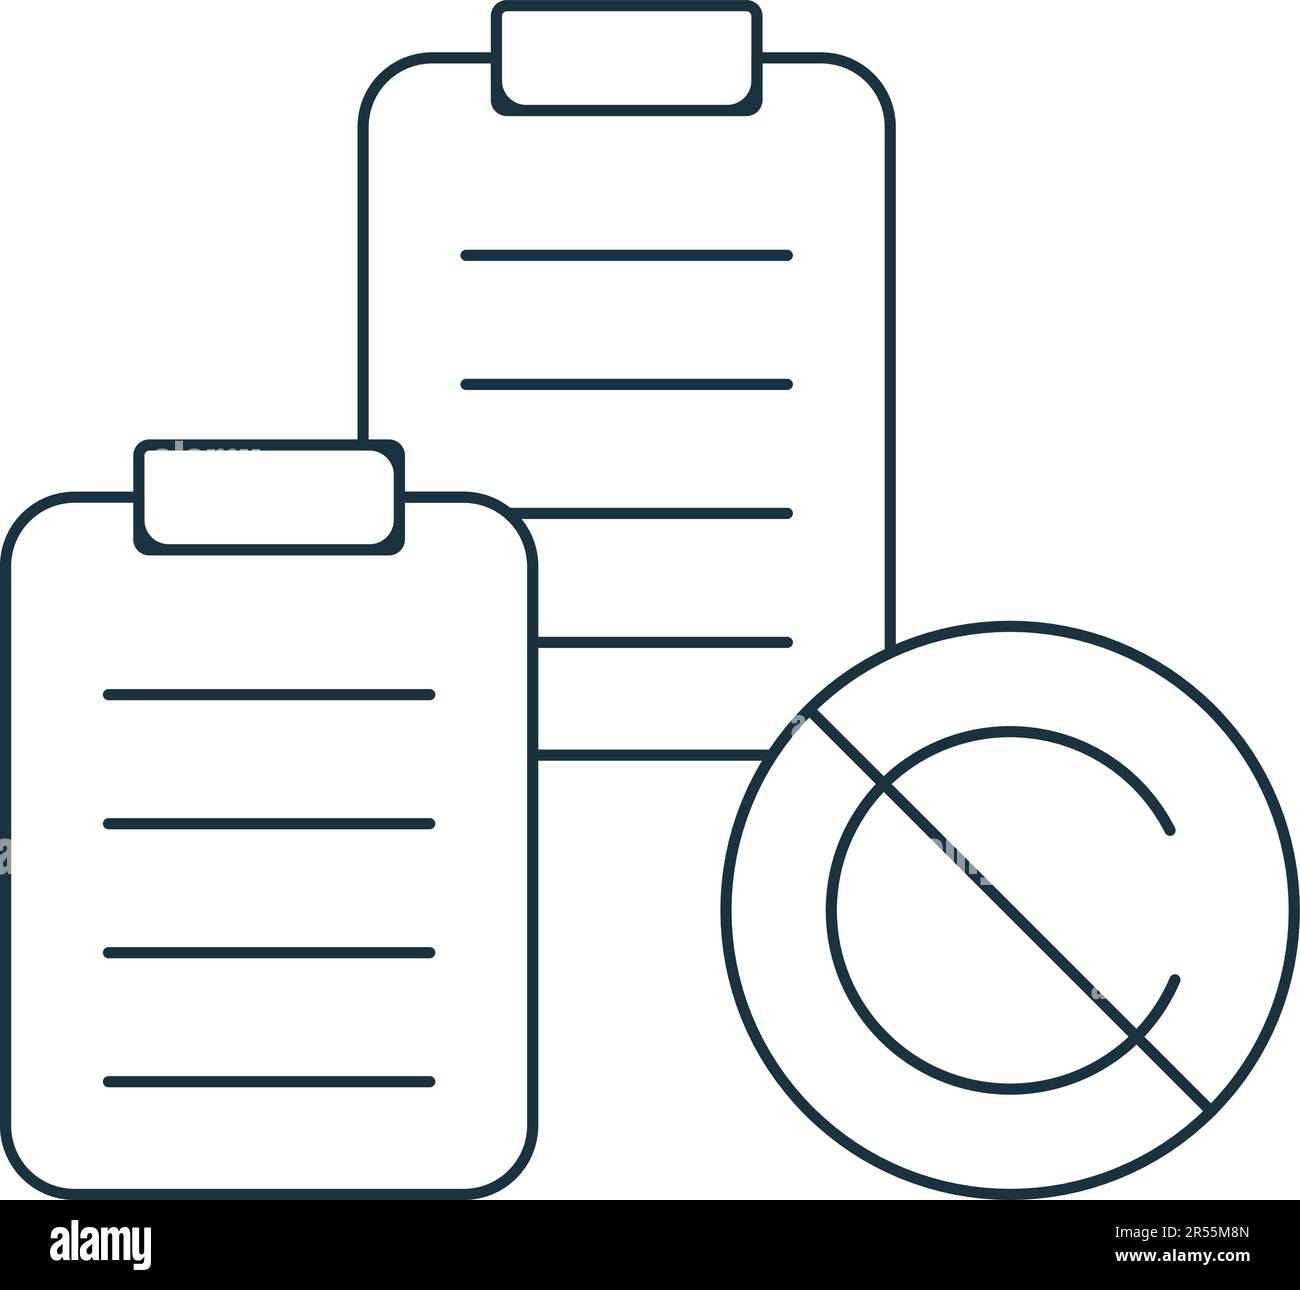 Plagiarism icon. Monochrome simple sign from intellectual property collection. Plagiarism icon for logo, templates, web design and infographics. Stock Vector